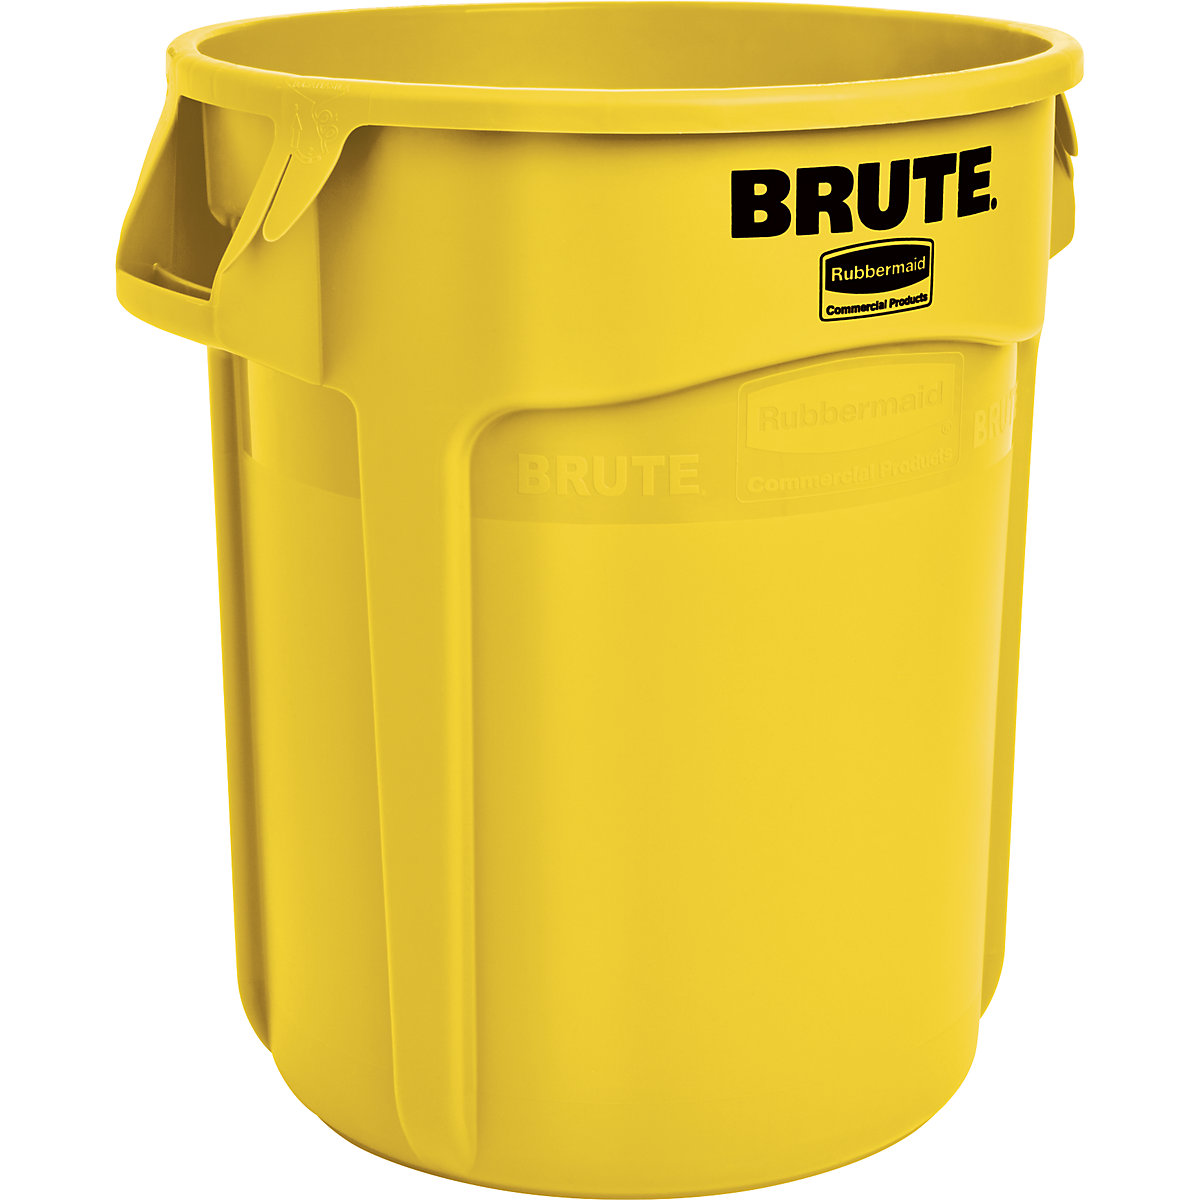 BRUTE® universal container, round – Rubbermaid, capacity 75 l, yellow-8